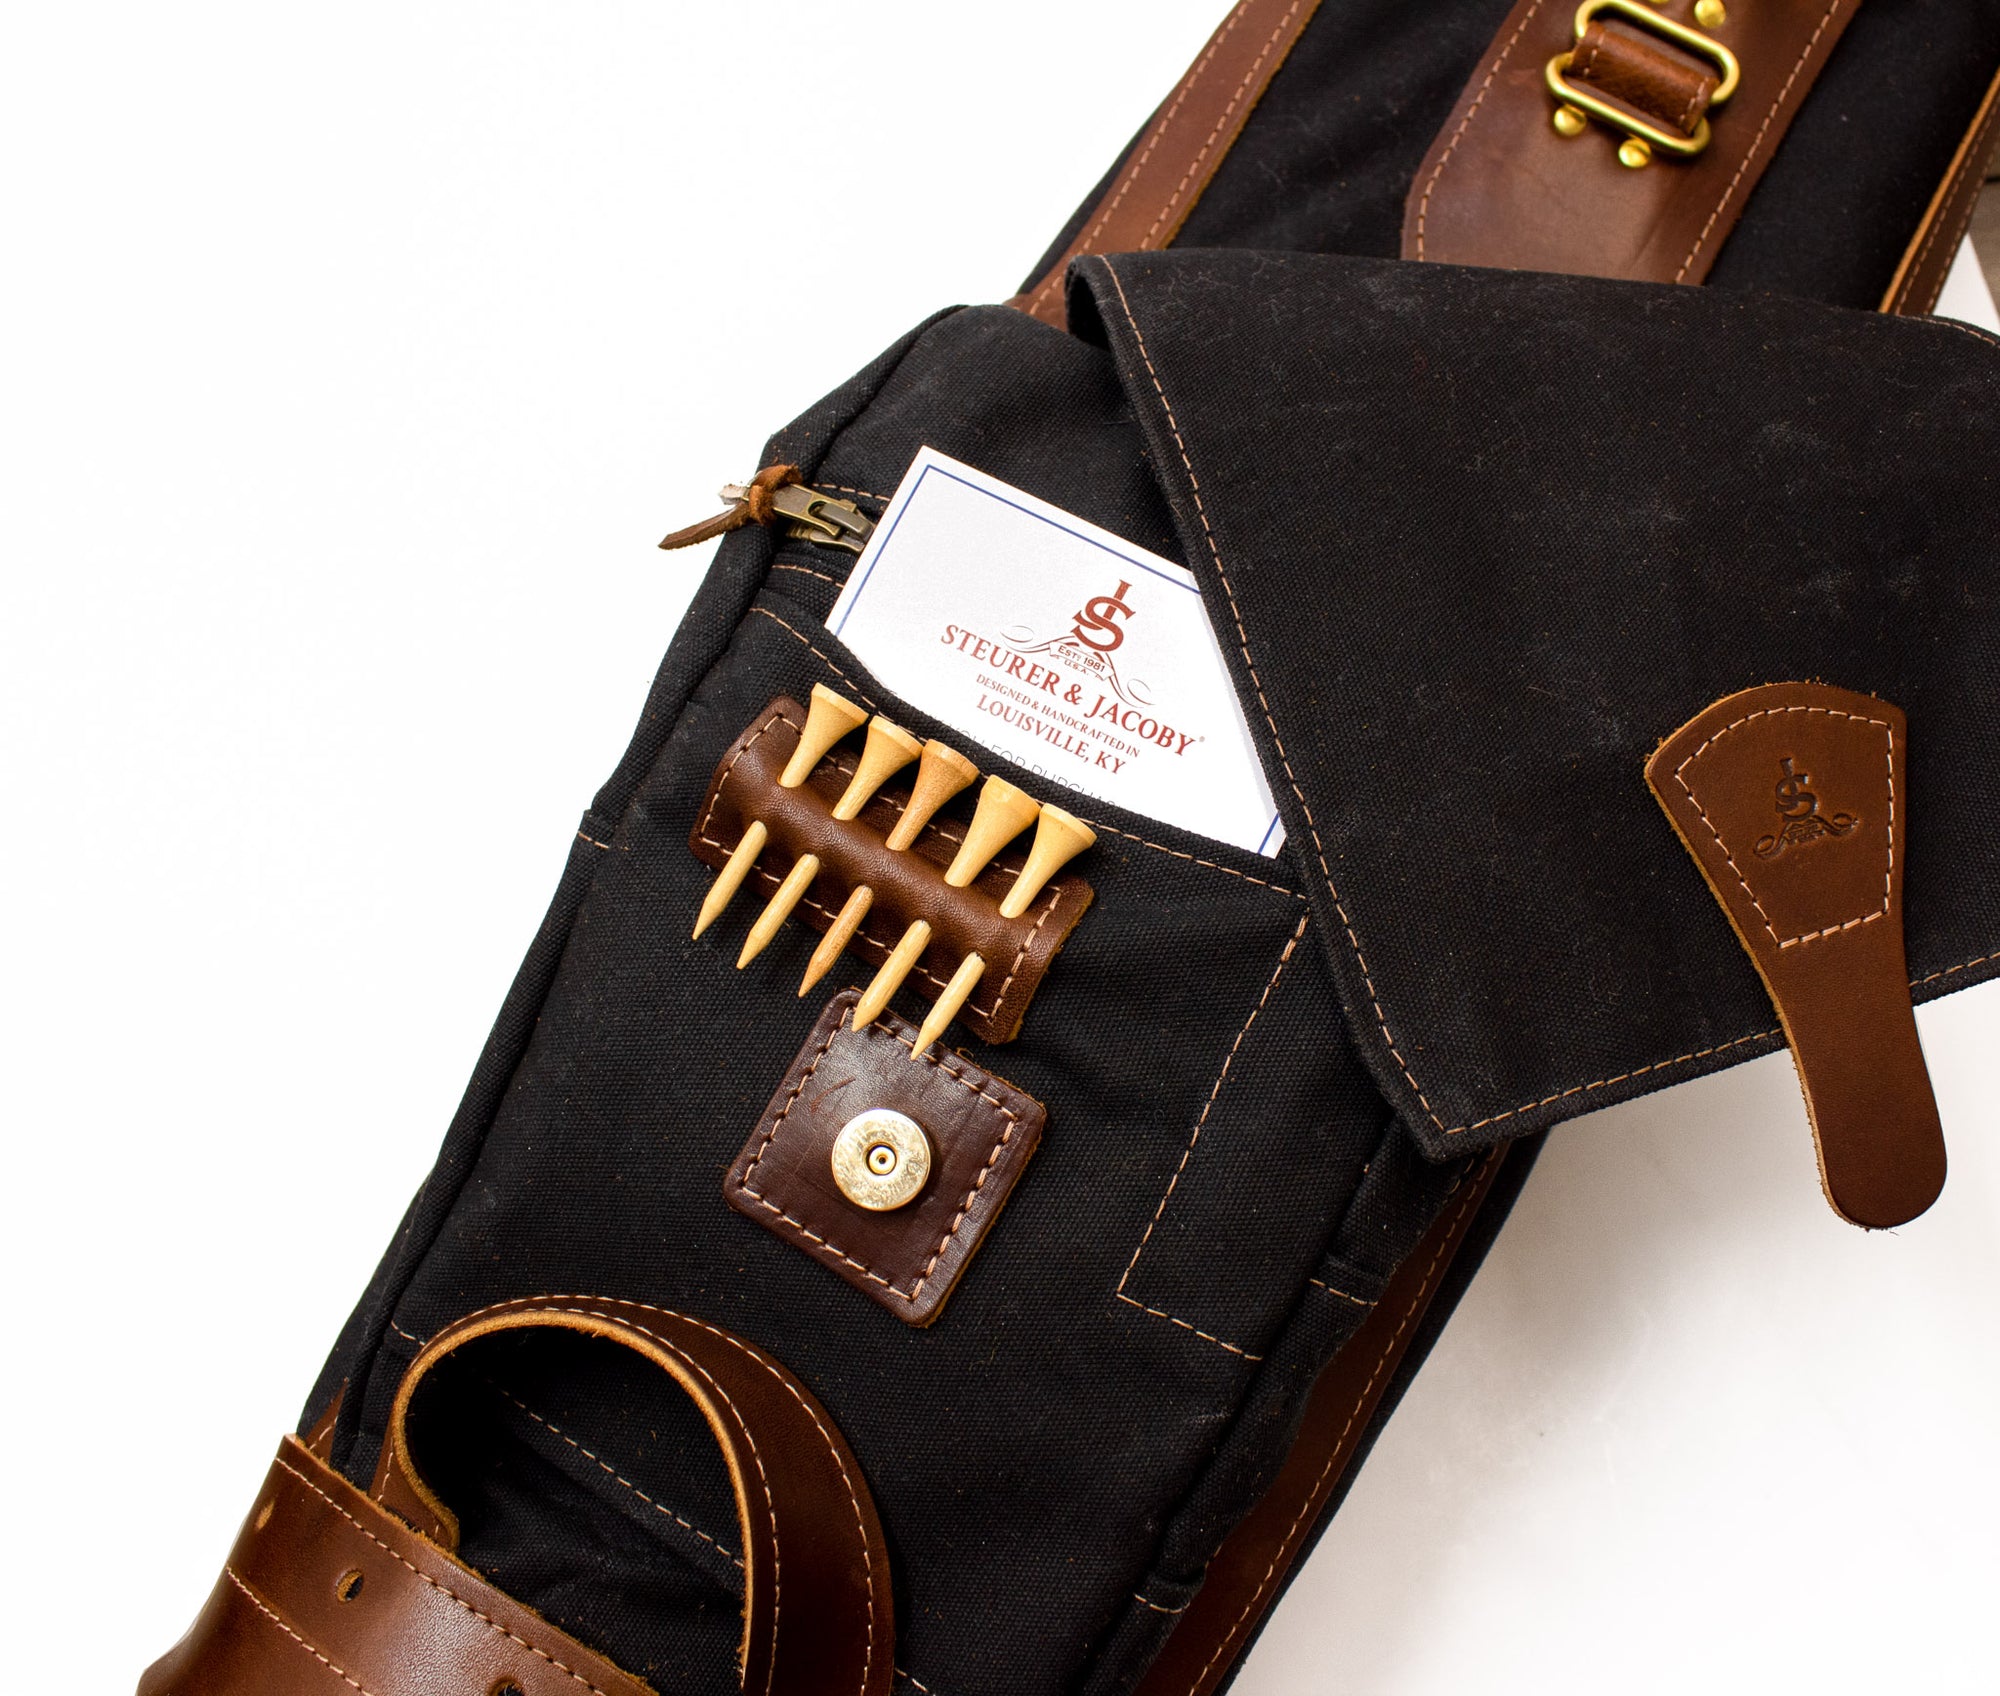 8" Sunday Style Golf Bag Black Waxed Canvas with Chestnut Leather Ball Pocket- Steurer & Jacoby